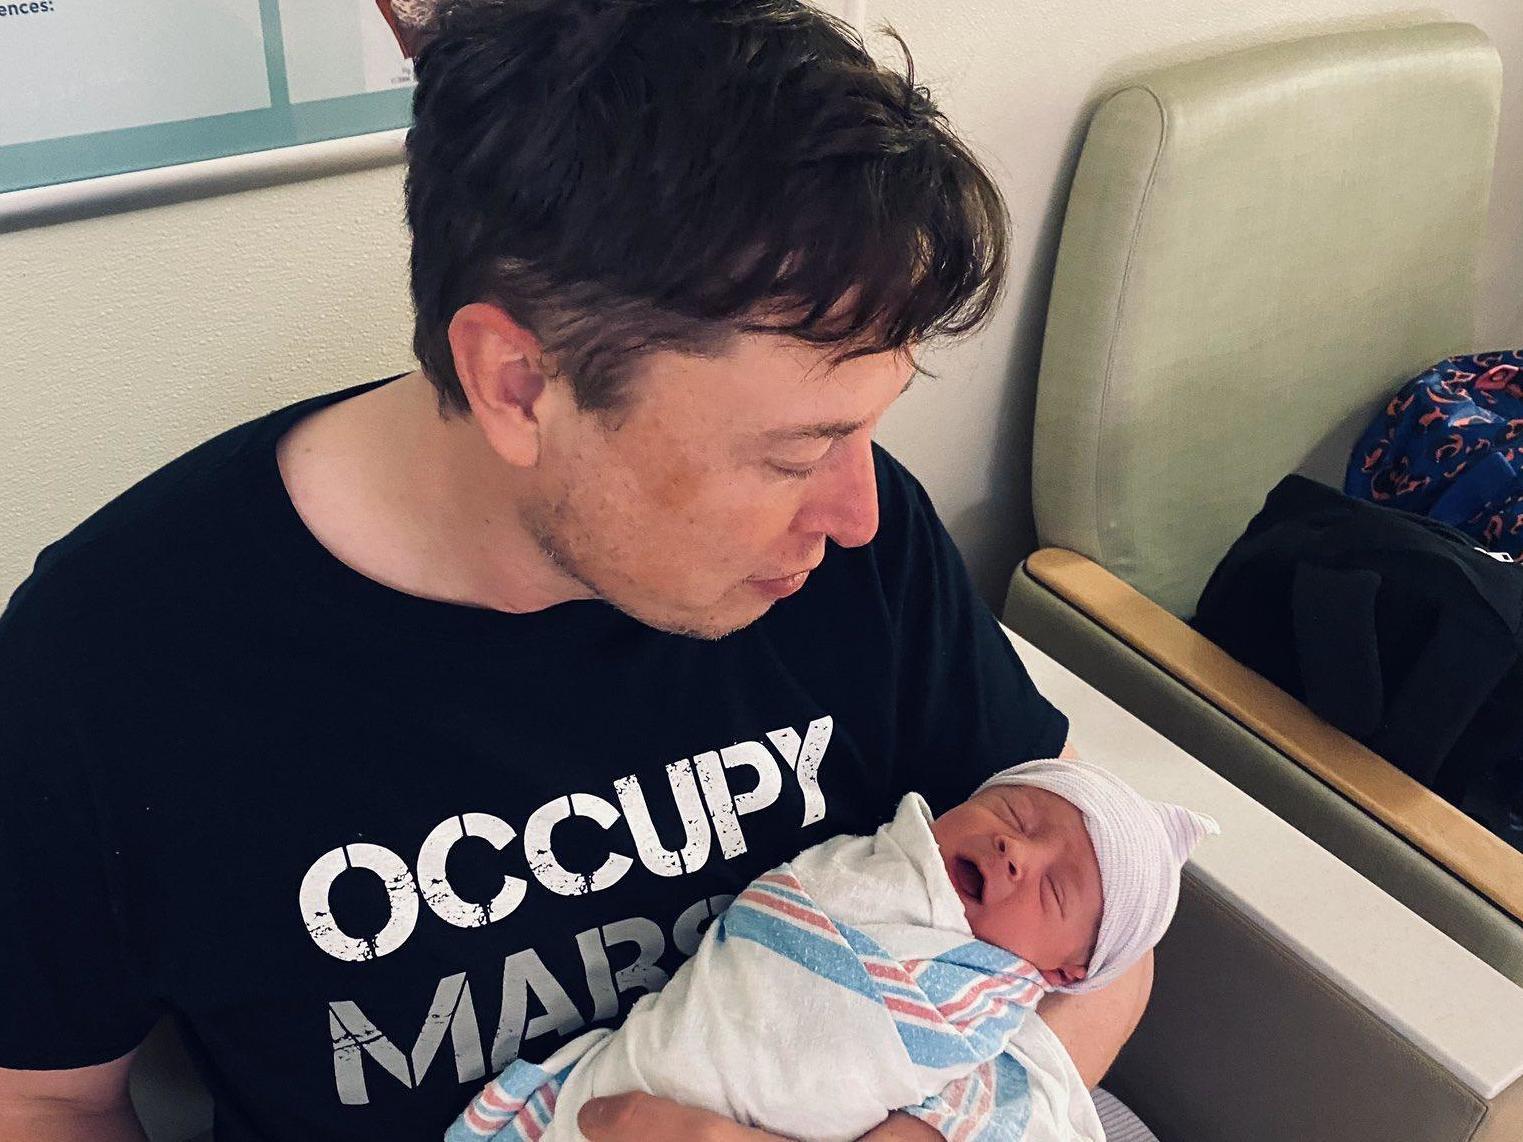 Elon Musk Girlfriend Grimes Confirms Their New Born Baby Name (See The Strange Name)